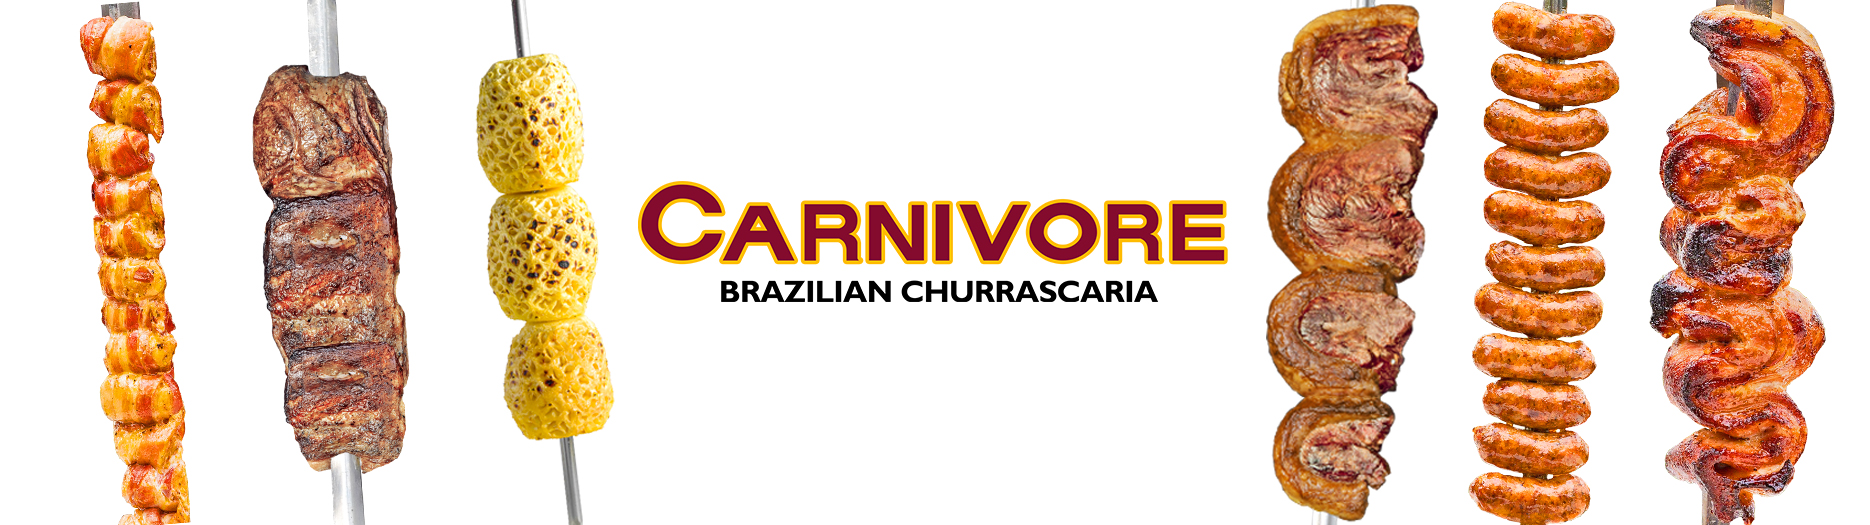 carnivore-website-listing-banner-1870px-x-525px (new)